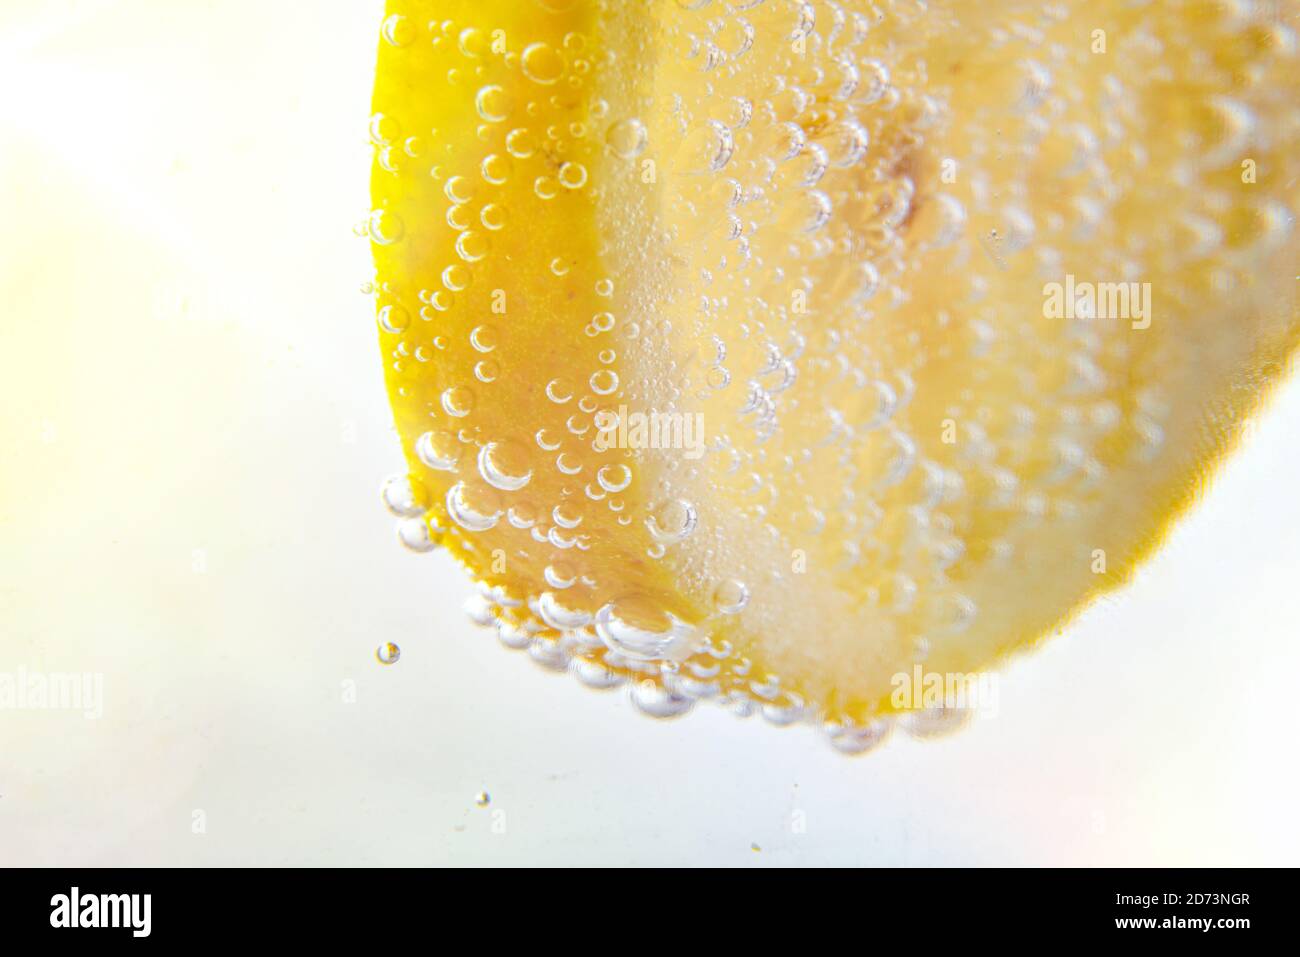 Detail of lemon dipped in water full of bubbles close up Stock Photo